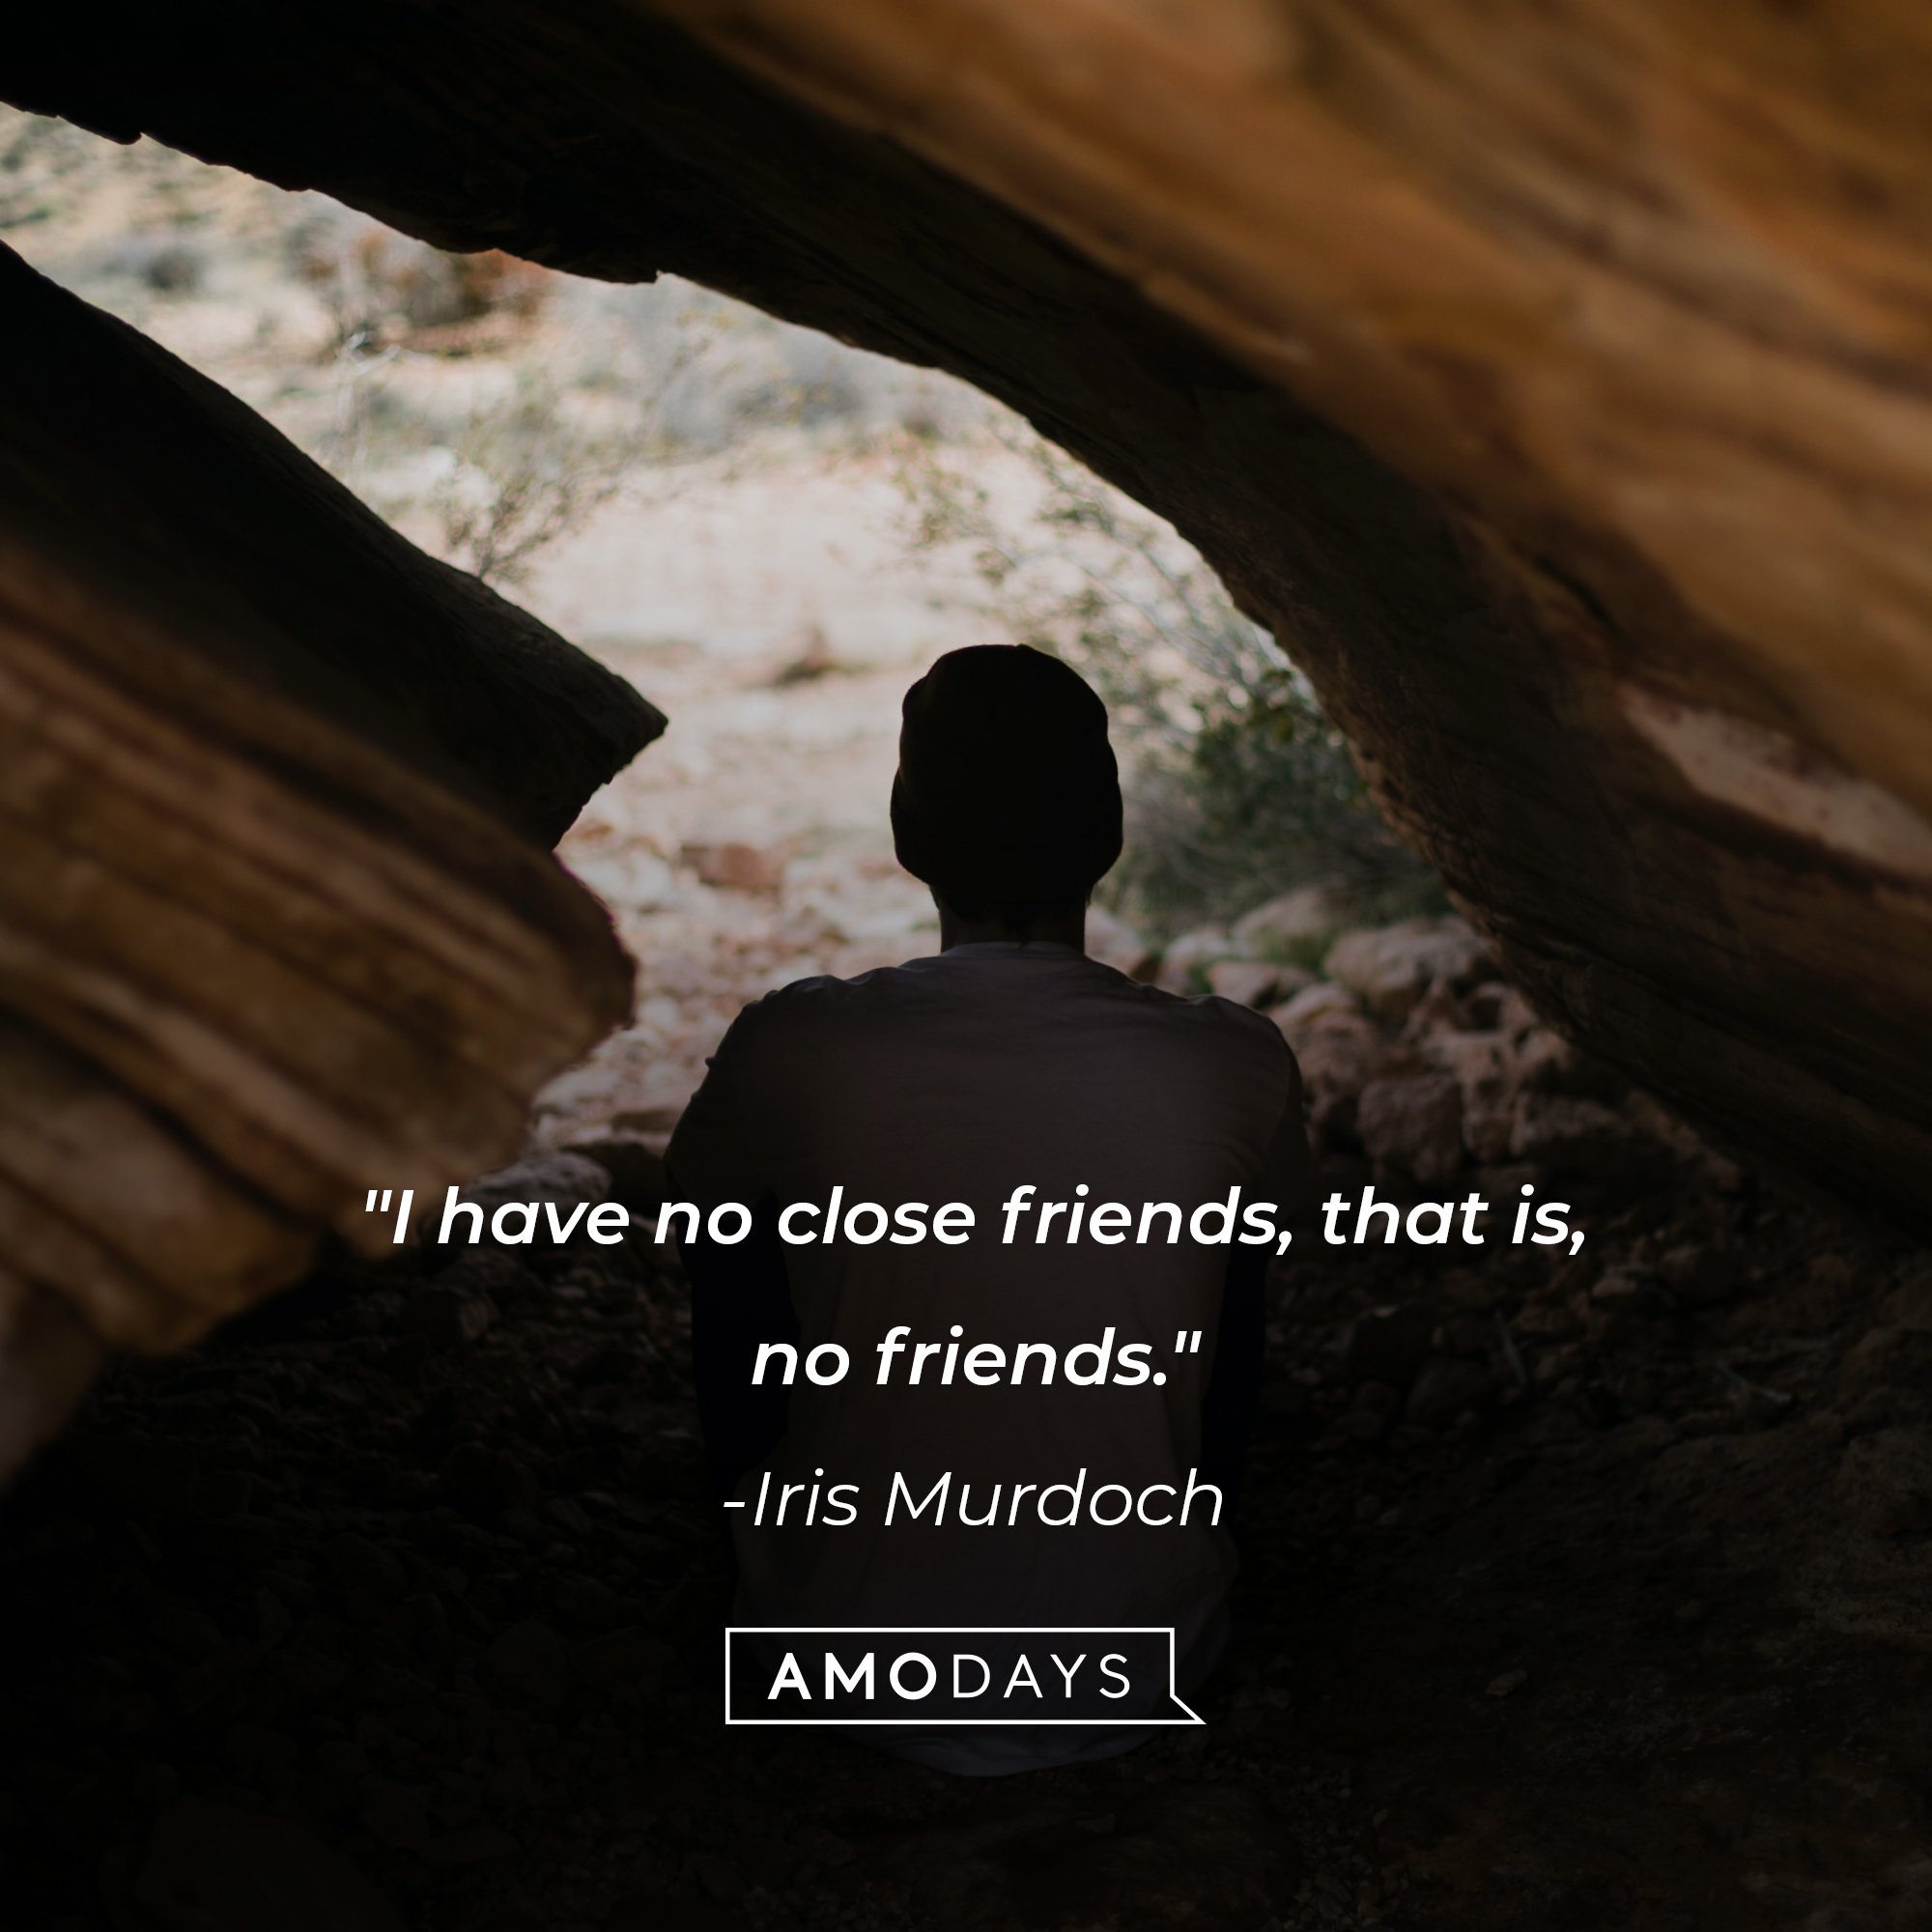 Iris Murdoch’s quote: "I have no close friends, that is, no friends." |  Image: AmoDays 